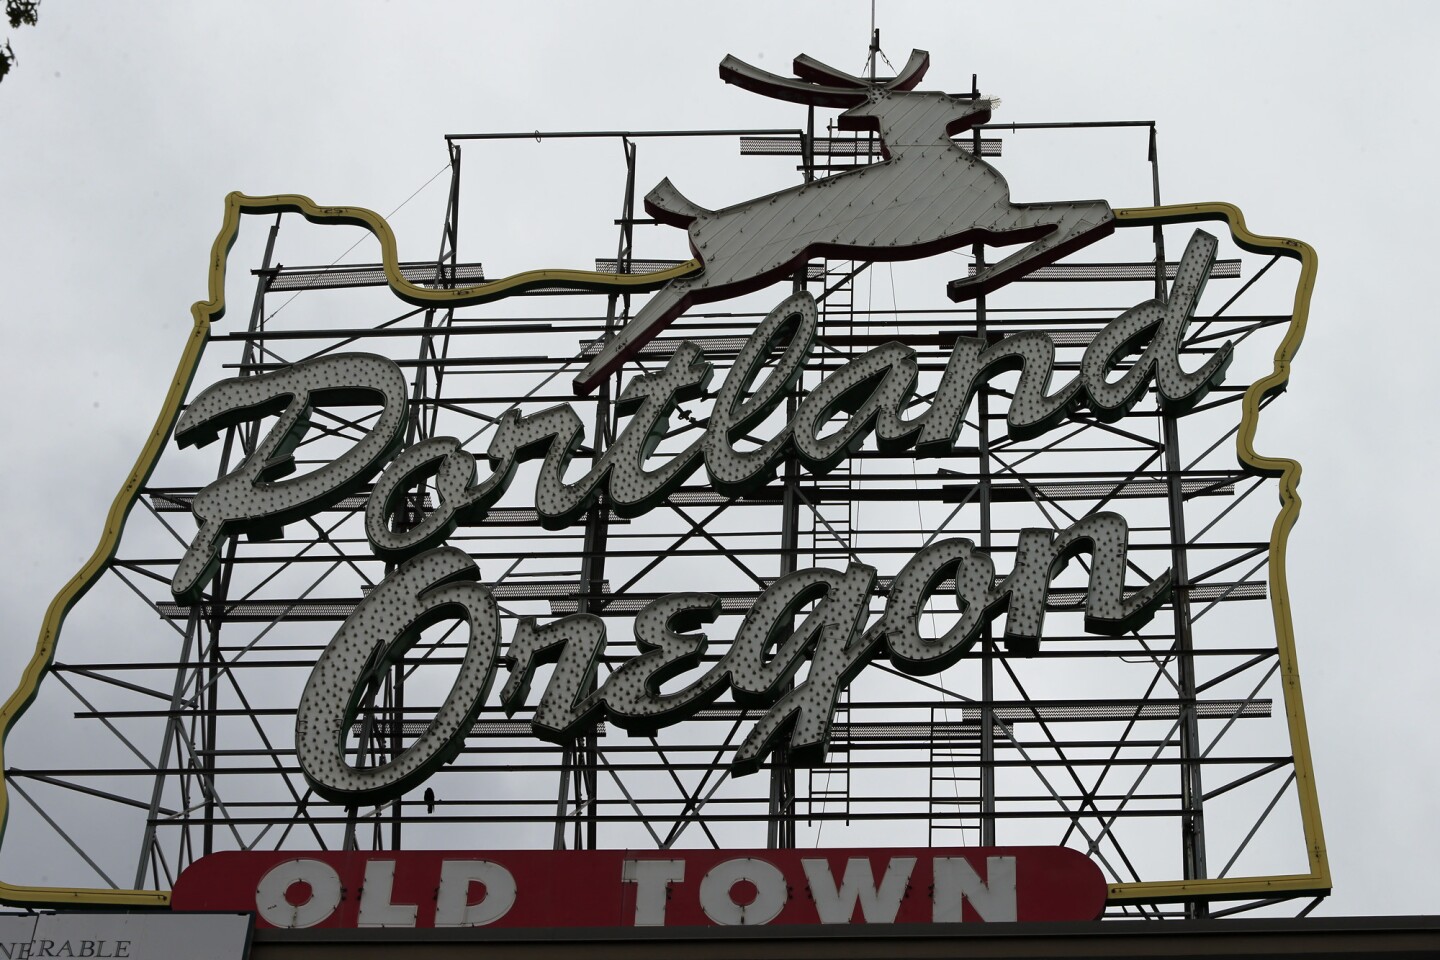 Greetings from Portland, Ore., where things are always changing, yet some things remain the same, such as this sign, which greets visitors from a rooftop in the Old Town area of the city.